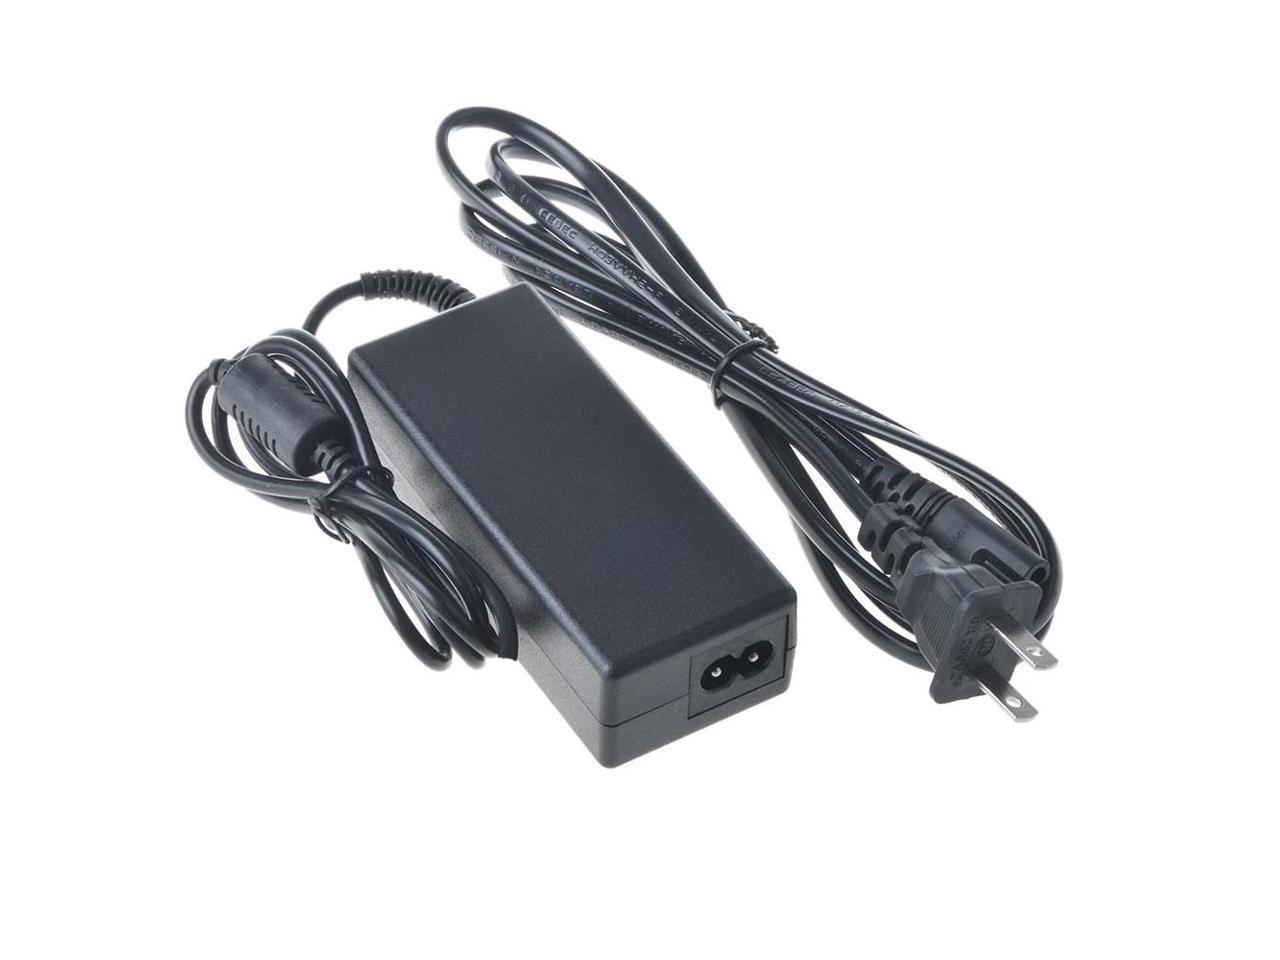 fits Motion Tablet PC M1300 M1400 DC/AC POWER ADAPTER charger power supply cord 